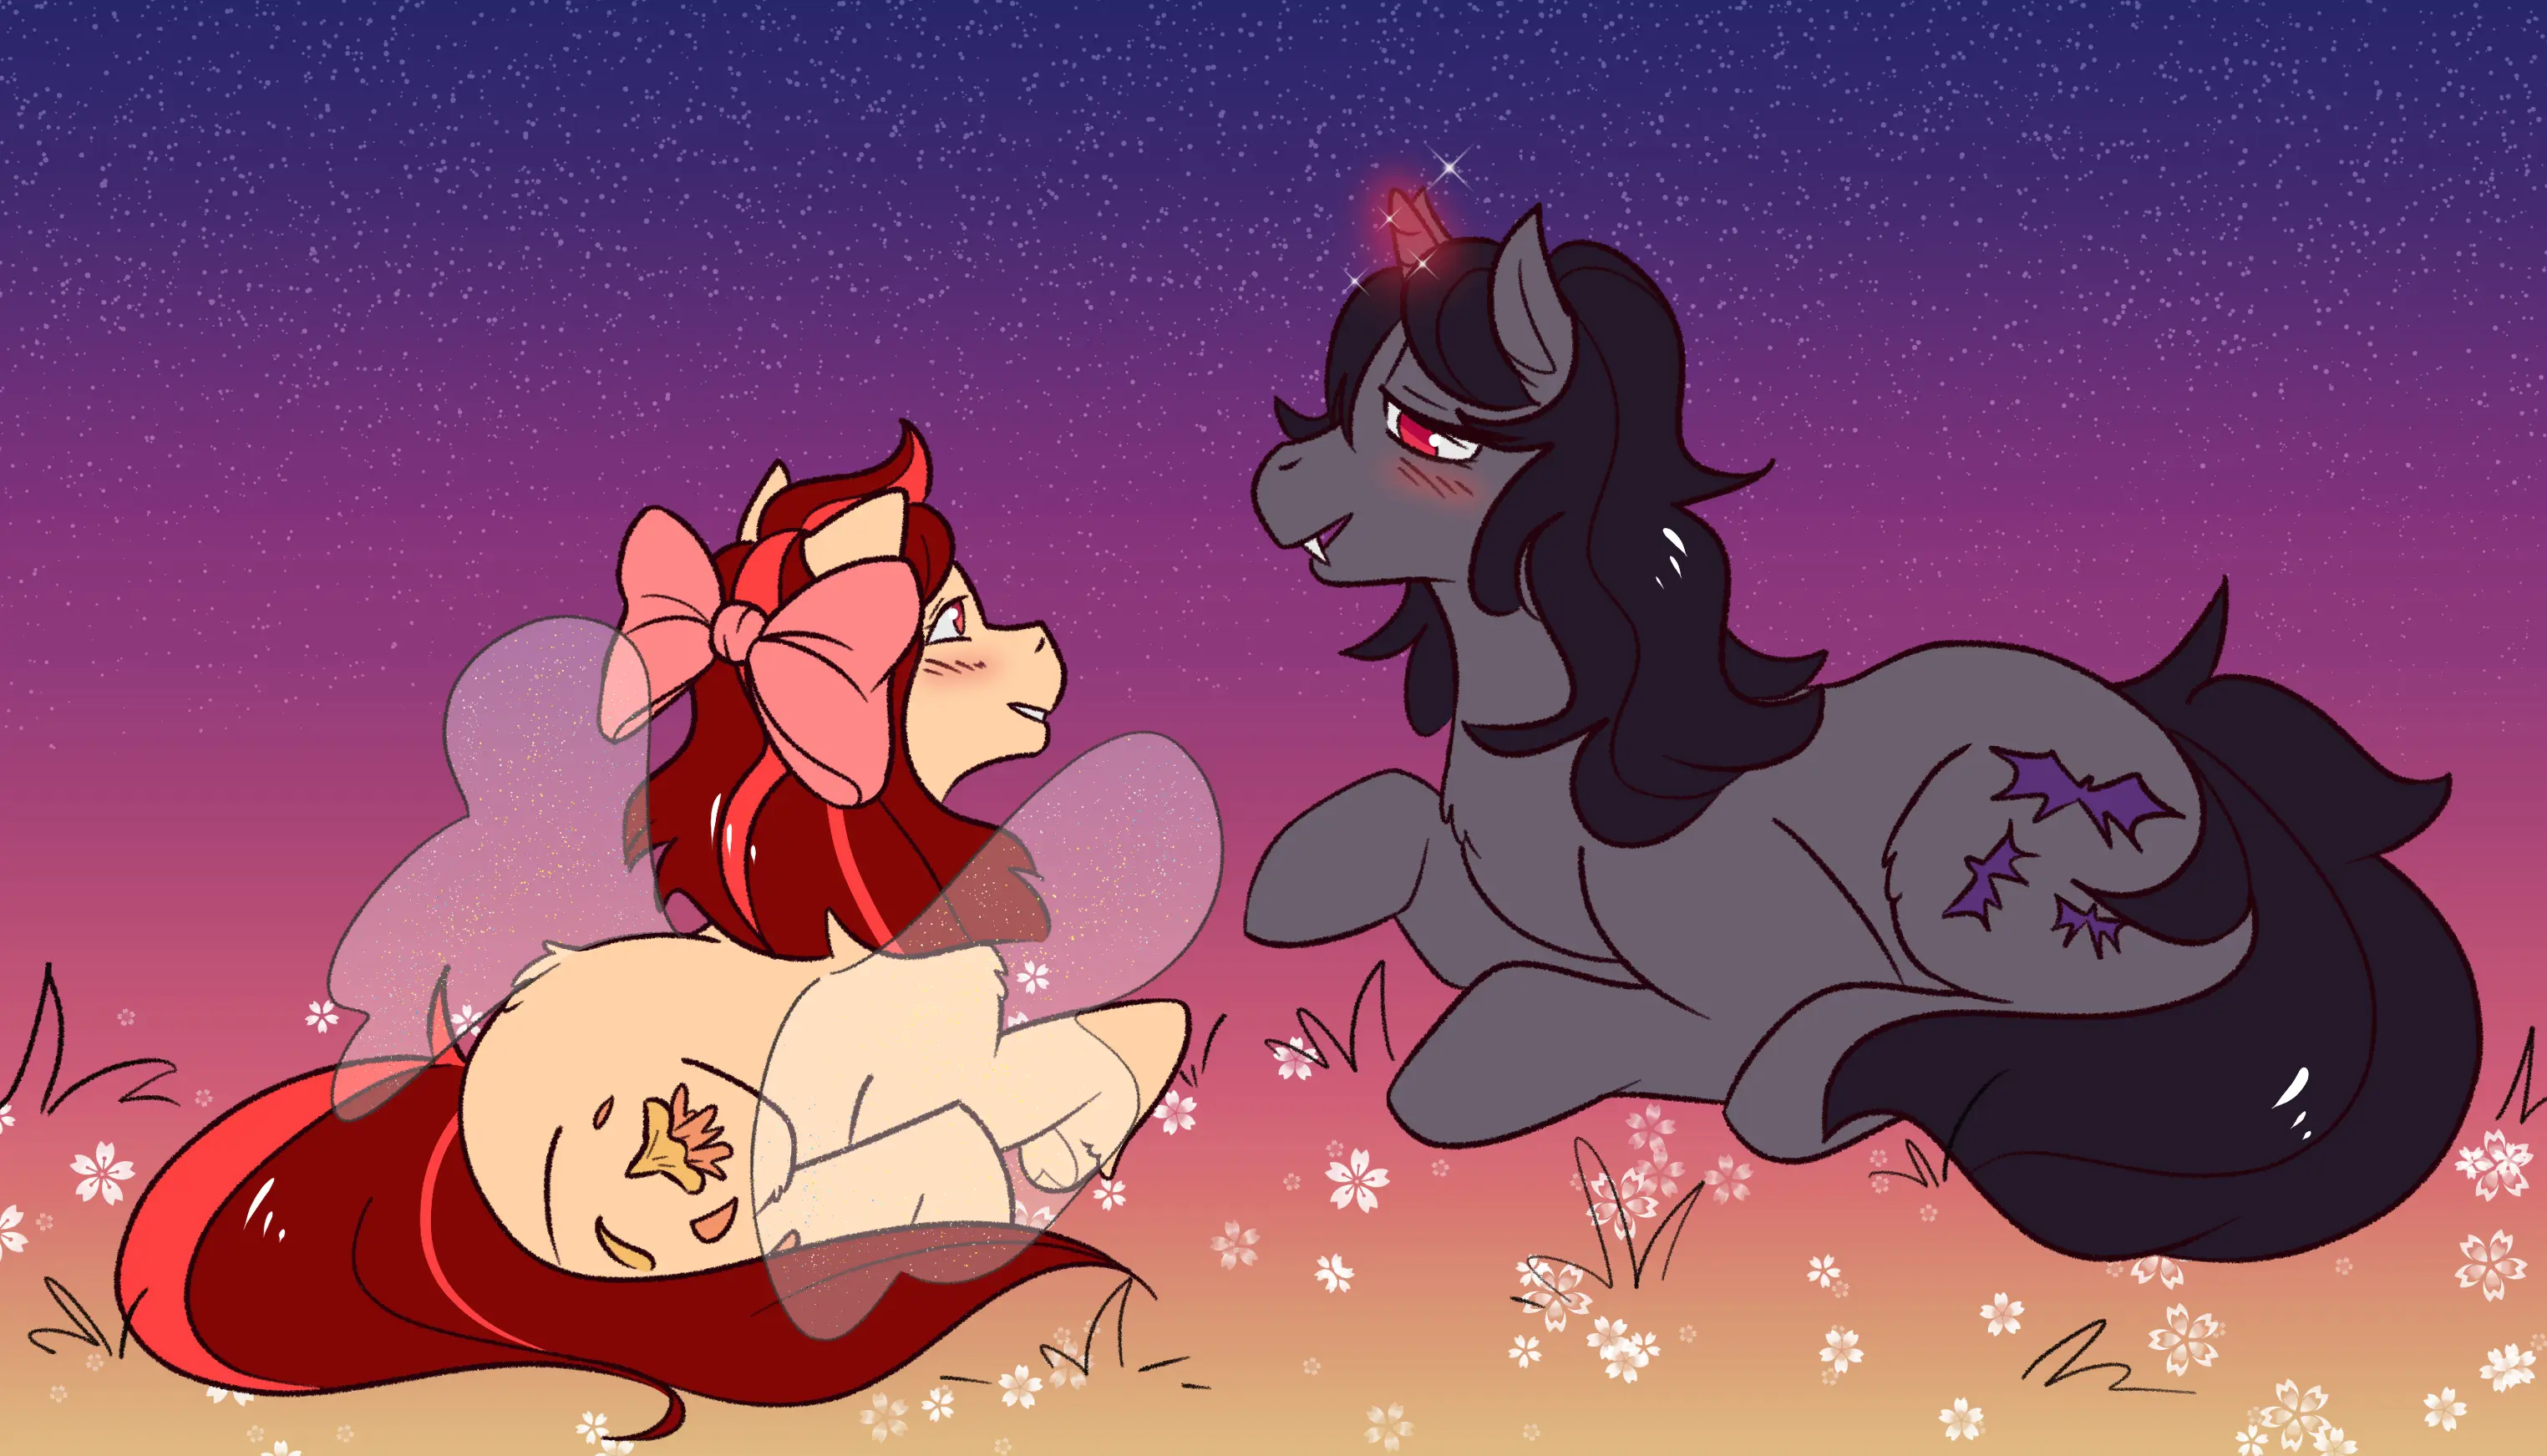 Me and Rei drawn as My Little Ponies.